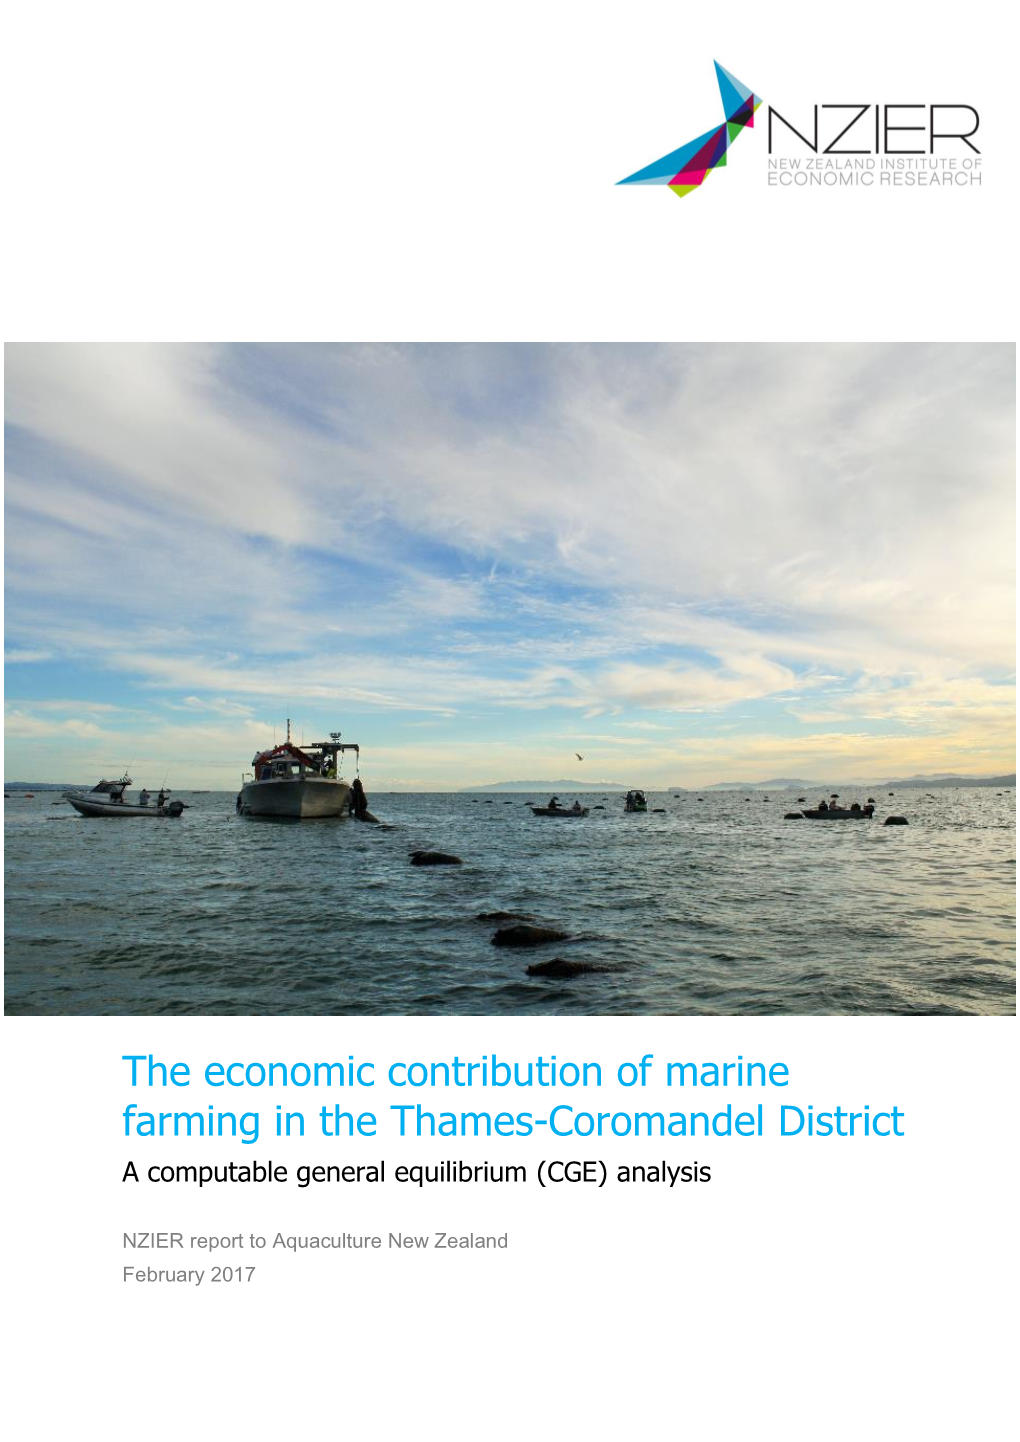 The Economic Contribution of Marine Farming in the Thames-Coromandel District a Computable General Equilibrium (CGE) Analysis